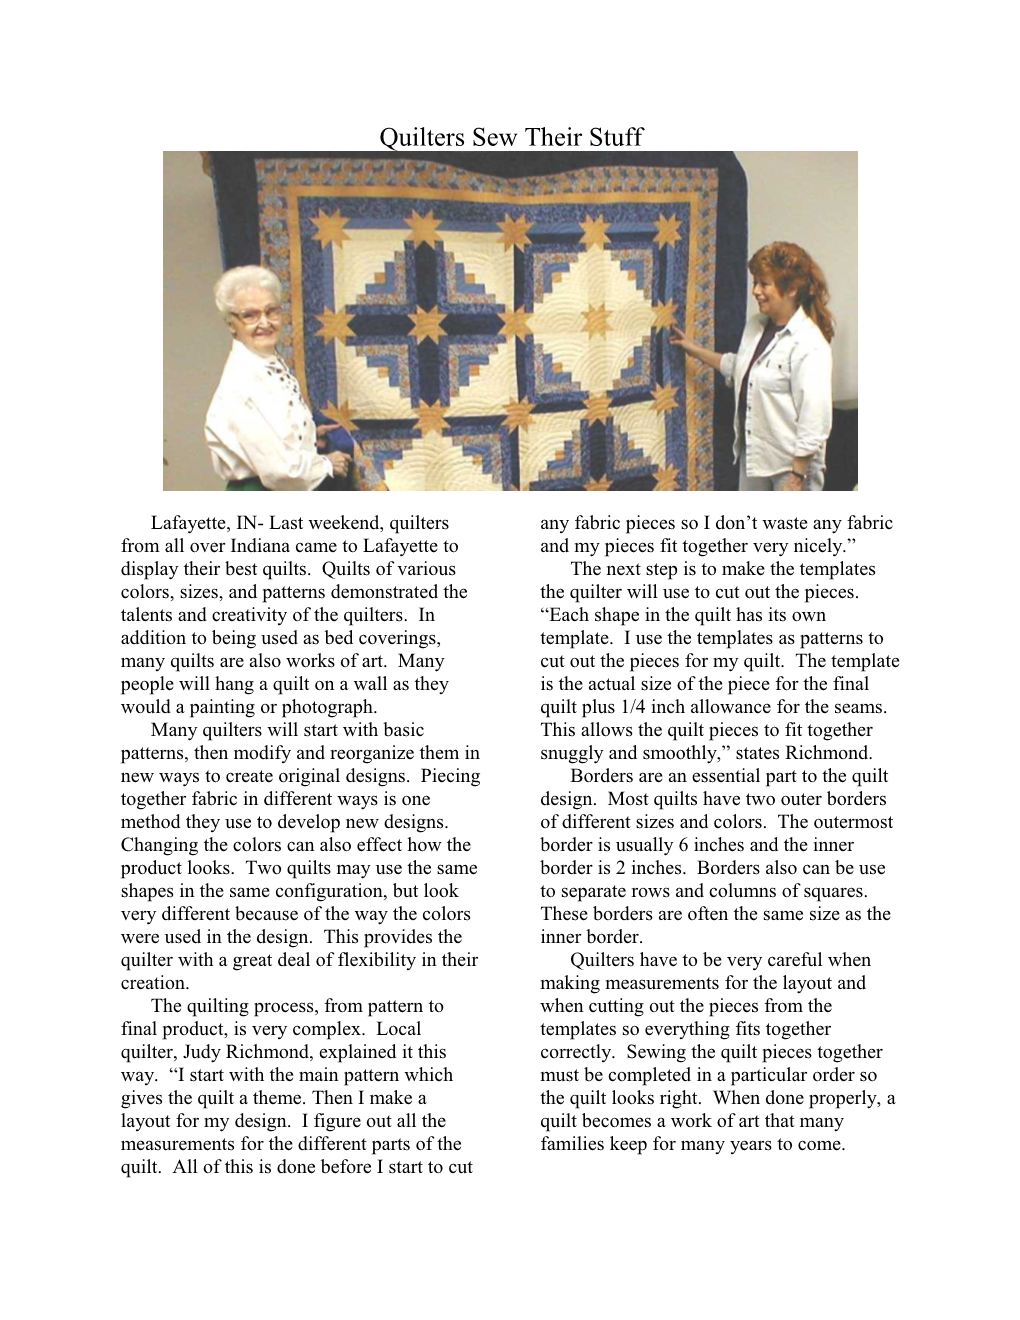 Quilters Sew Their Stuff s1